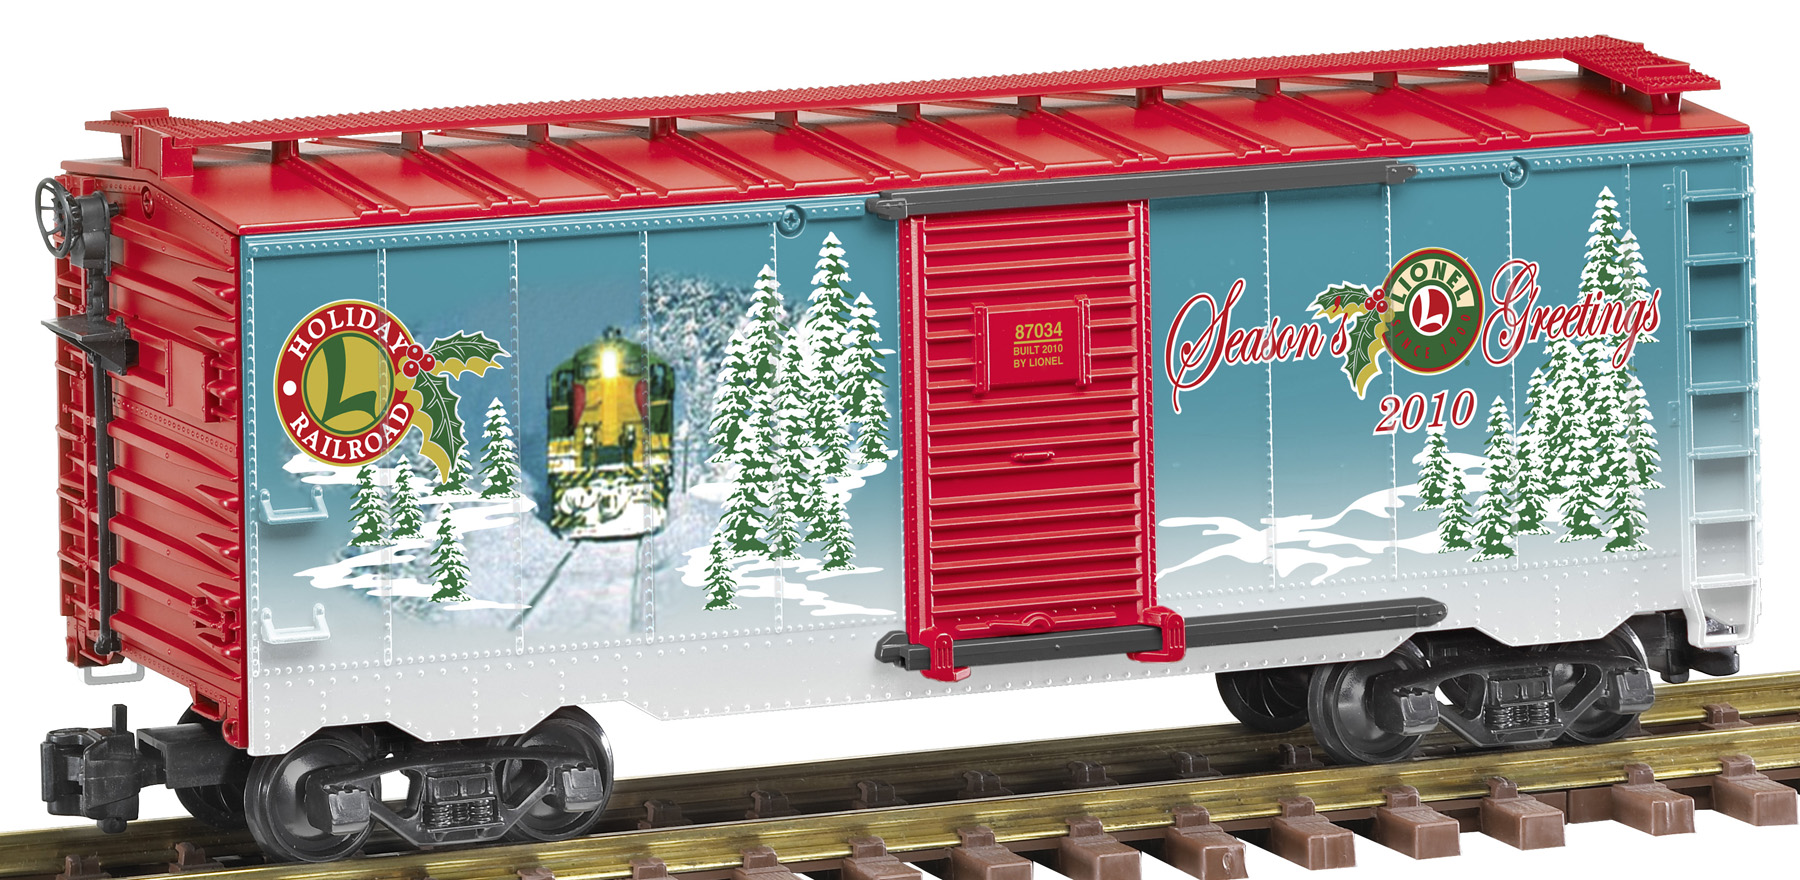 8-87034 2010 Holiday Christmas Boxcar Lionel Large Scale